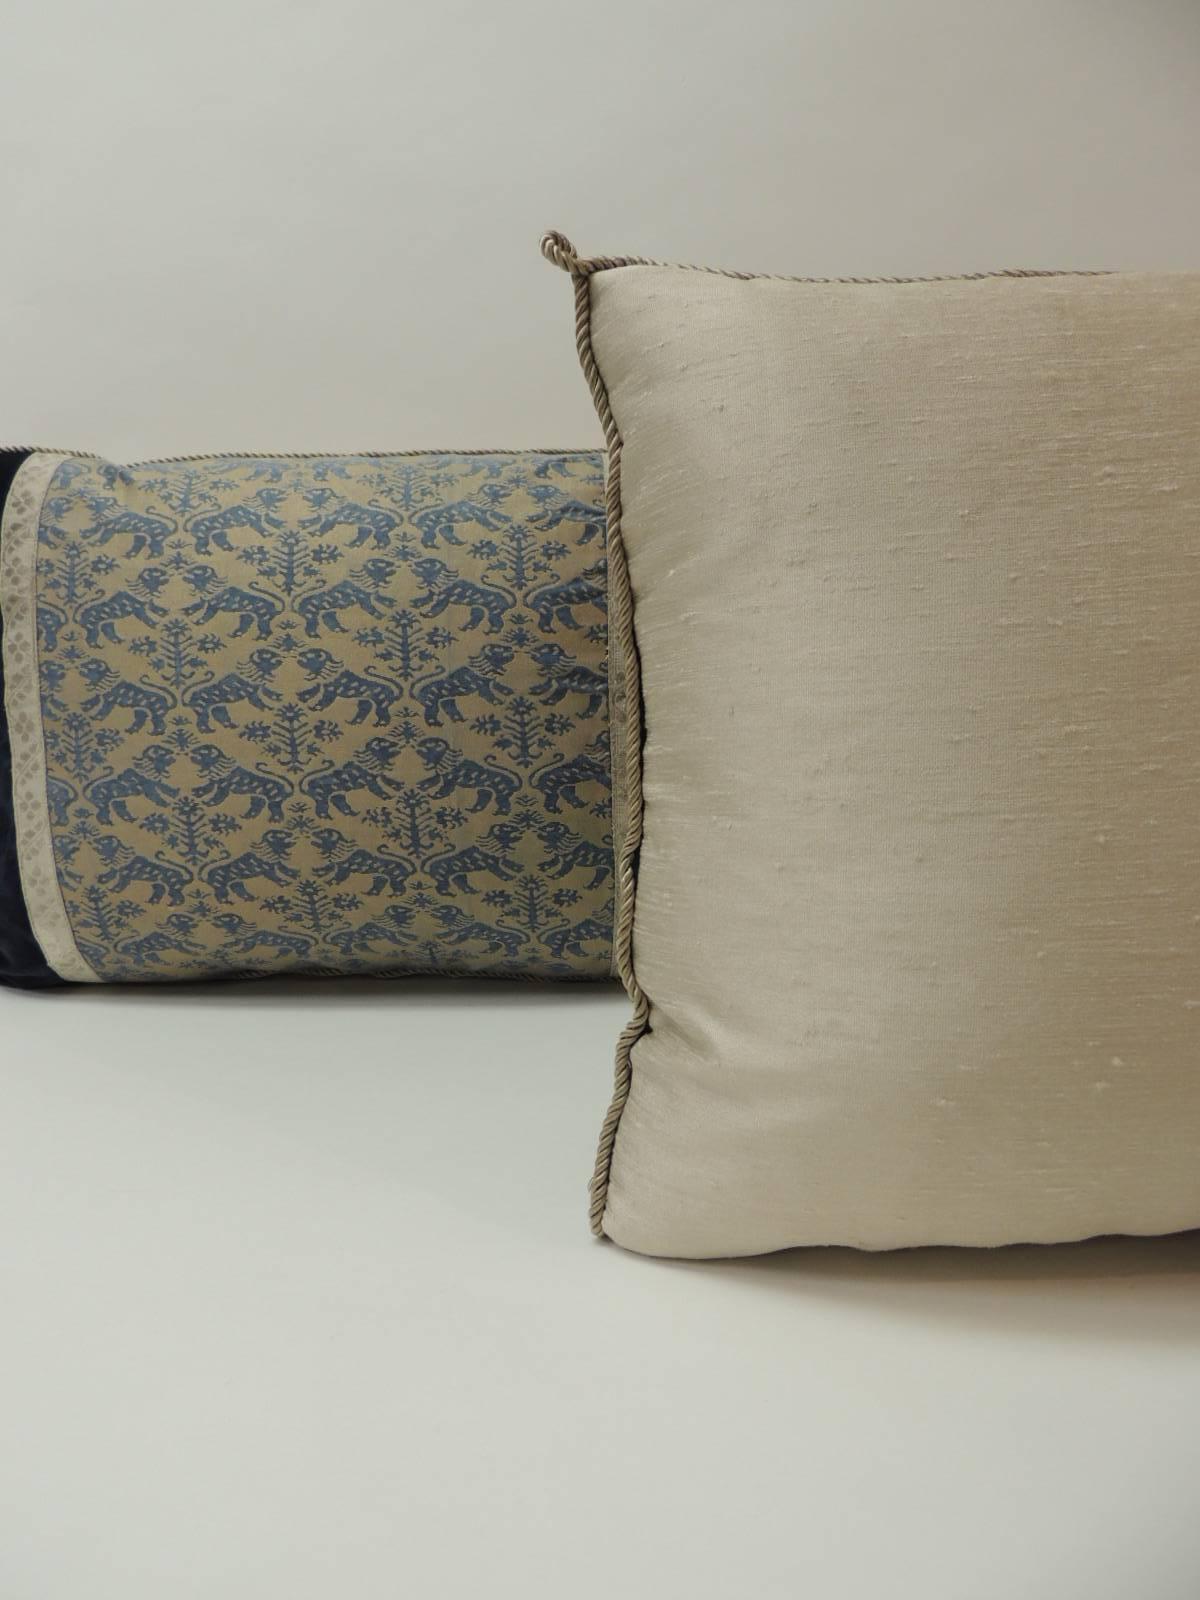 Hand-Crafted Pair of Vintage Fortuny “Richelieu” Blue on Silver Decorative Bolster Pillows